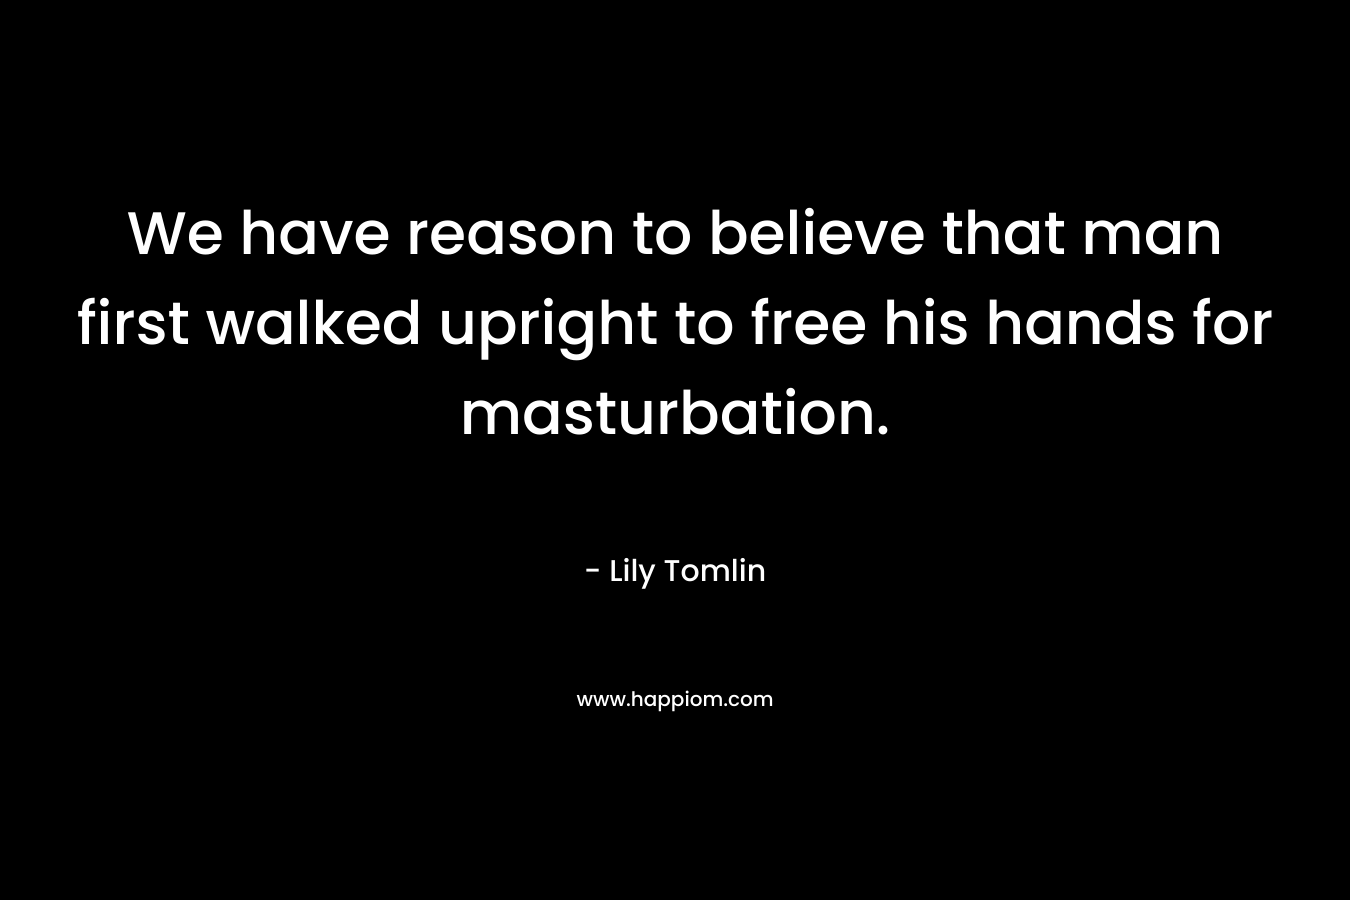 We have reason to believe that man first walked upright to free his hands for masturbation. – Lily Tomlin